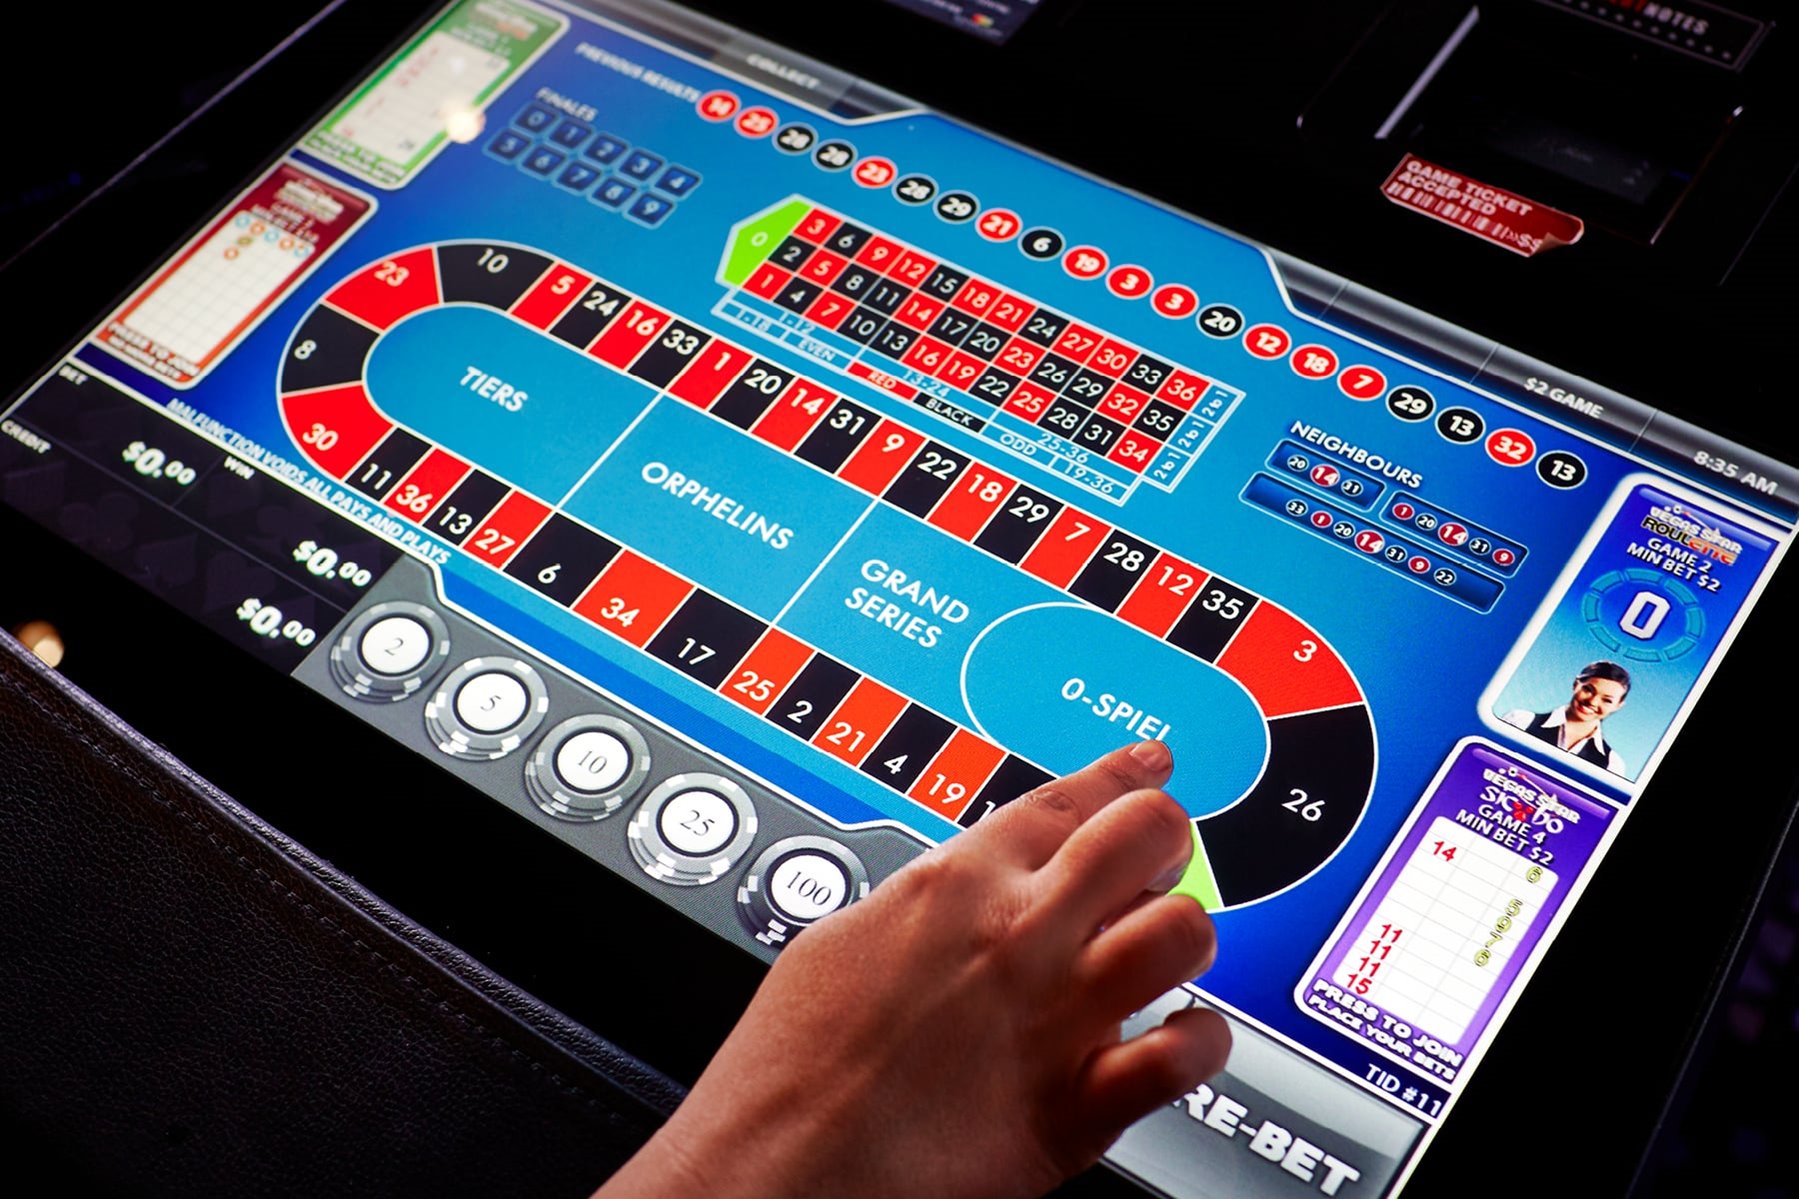 Roulette Computers - Can A Computer Predict Roulette? - King Casino